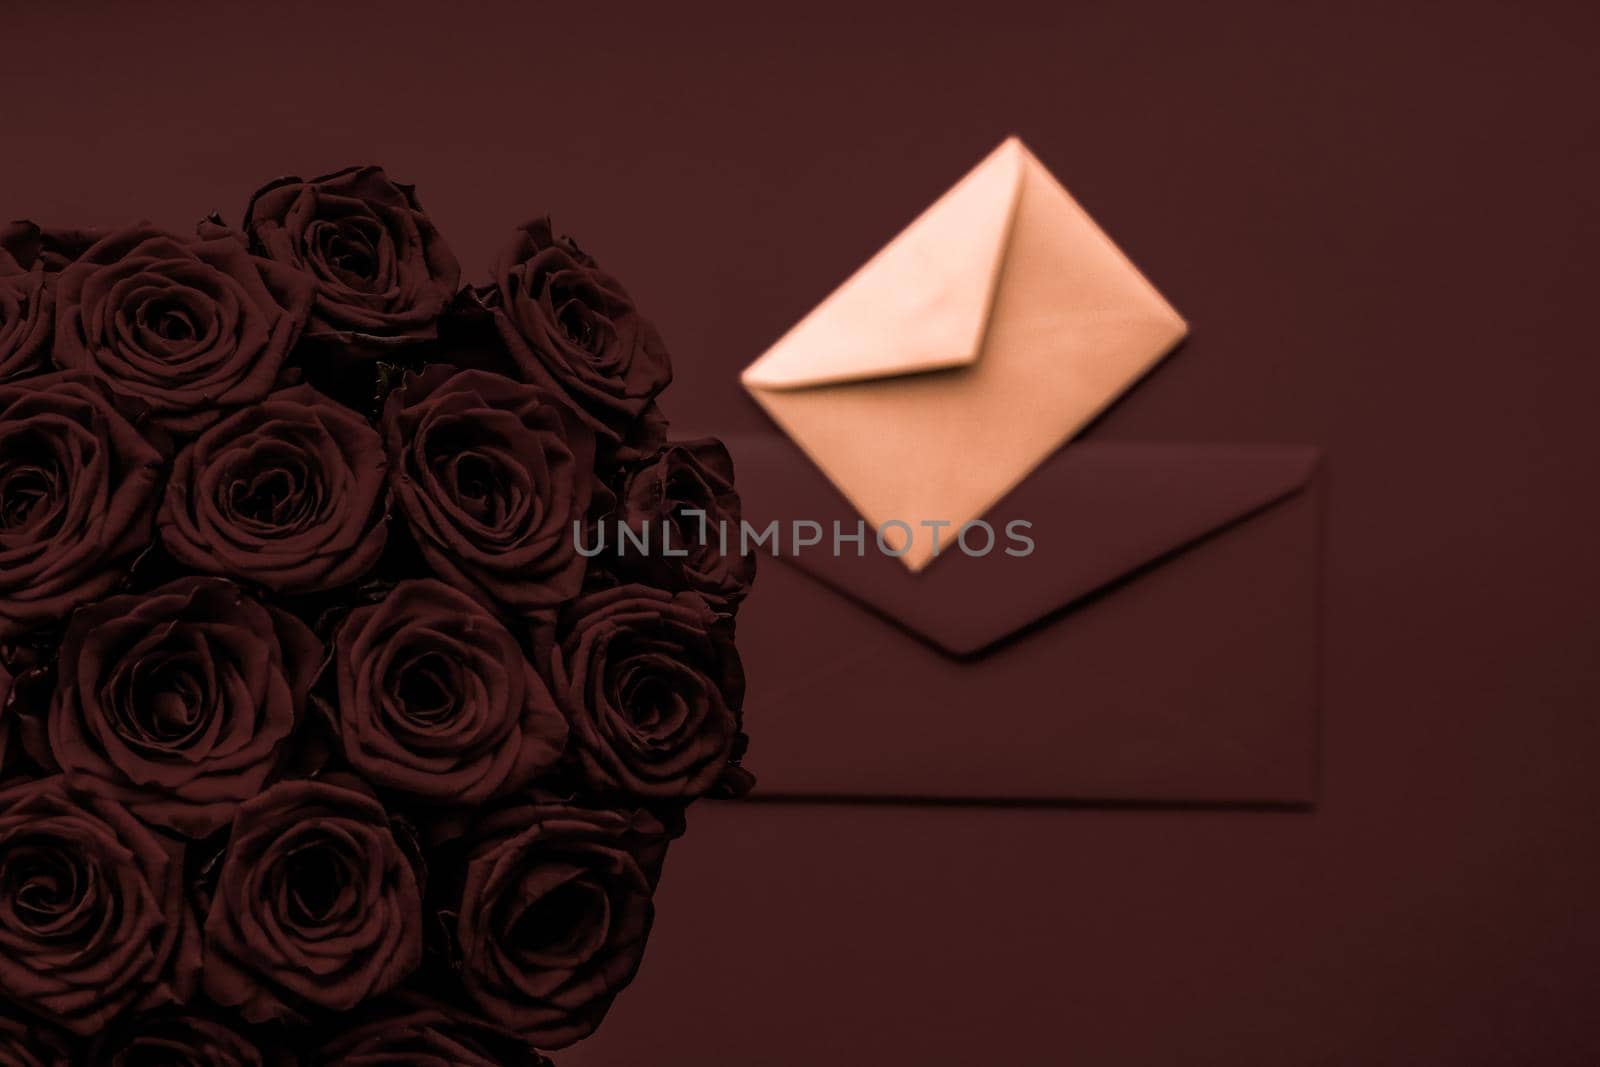 Holidays gift, floral present and happy relationship concept - Love letter and flowers delivery on Valentines Day, luxury bouquet of roses and card on chocolate background for romantic holiday design